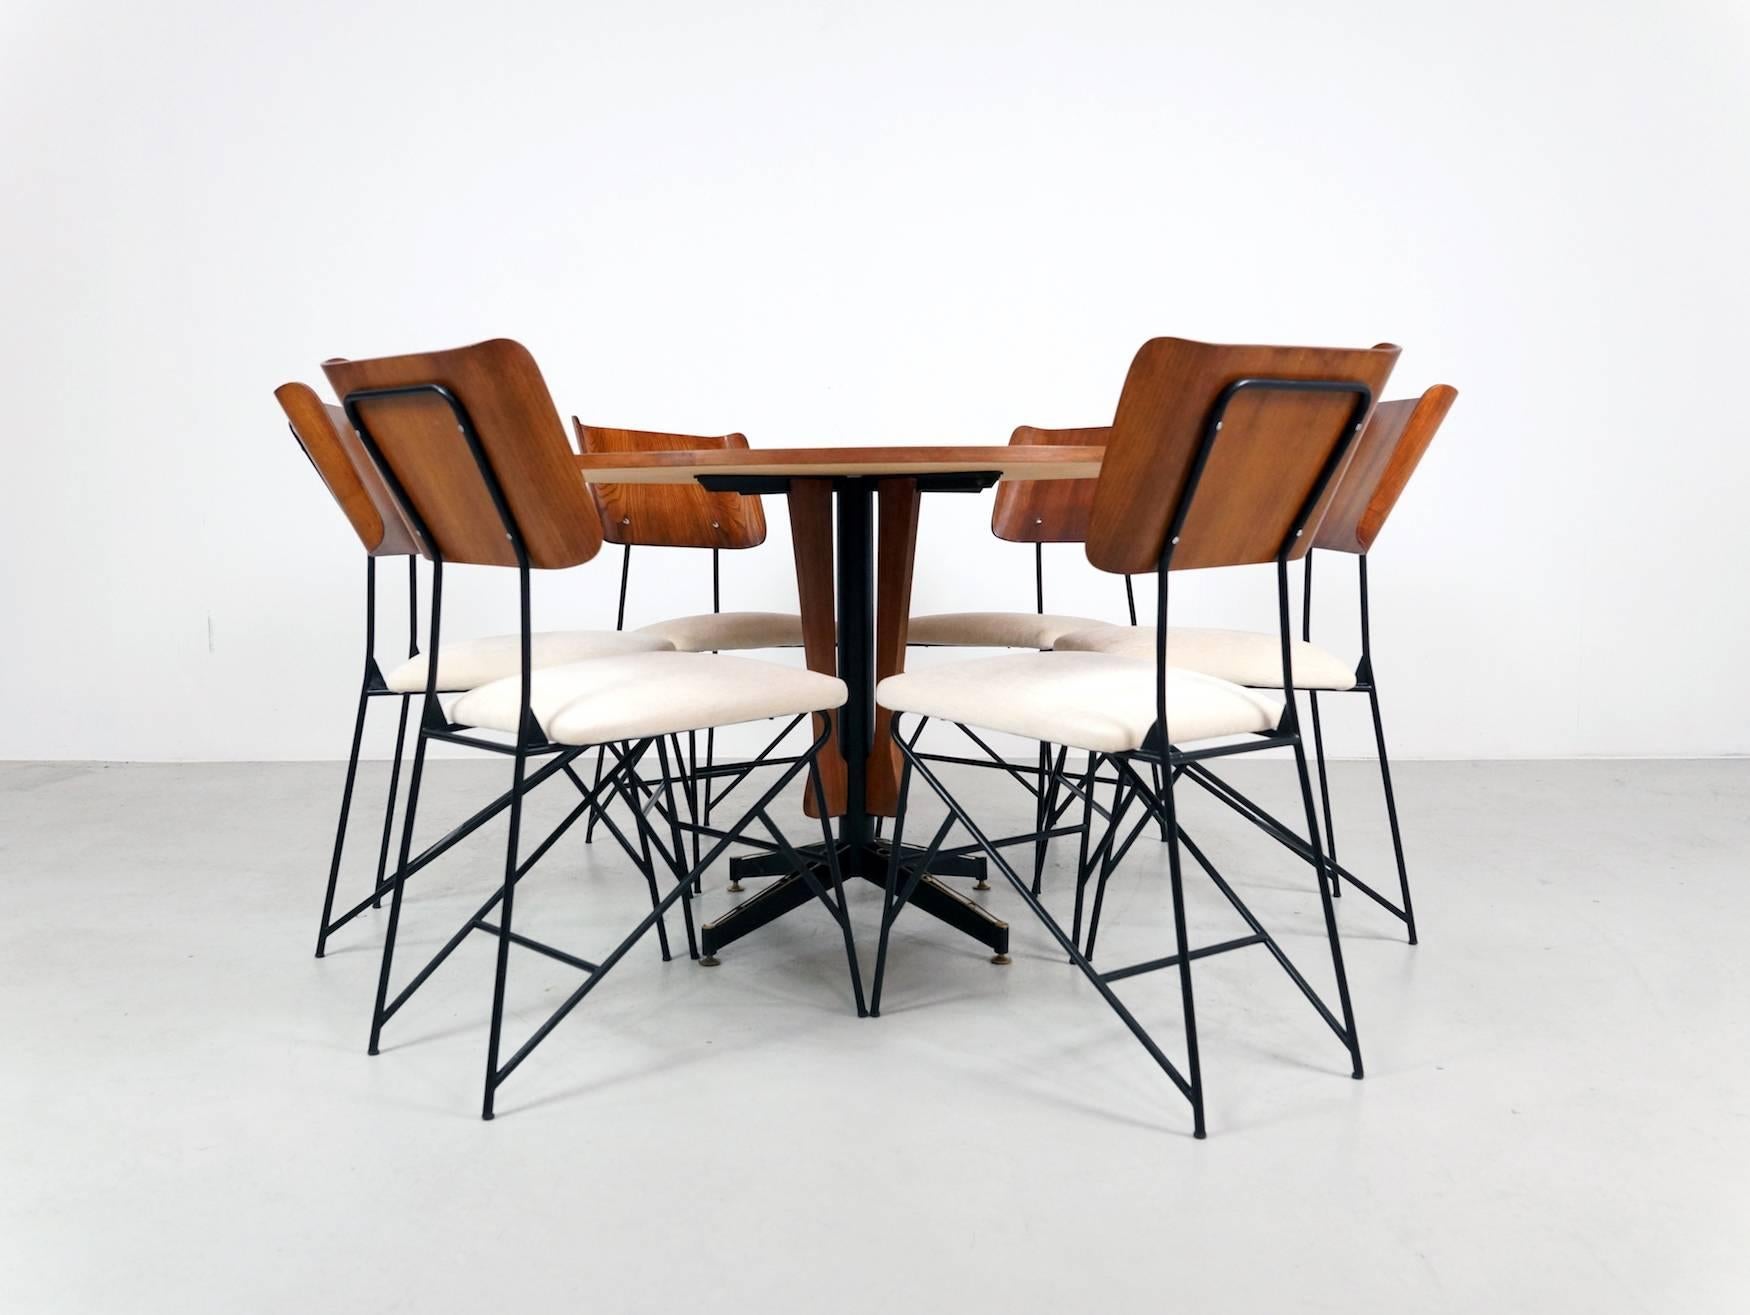 Highly desirable set of six Carlo Ratti Chairs from the 1950s in perfect condition. The chairs wood and frame looks grate with very nice new fabric seats. This set of six chairs from Italy are not so common to find.
 